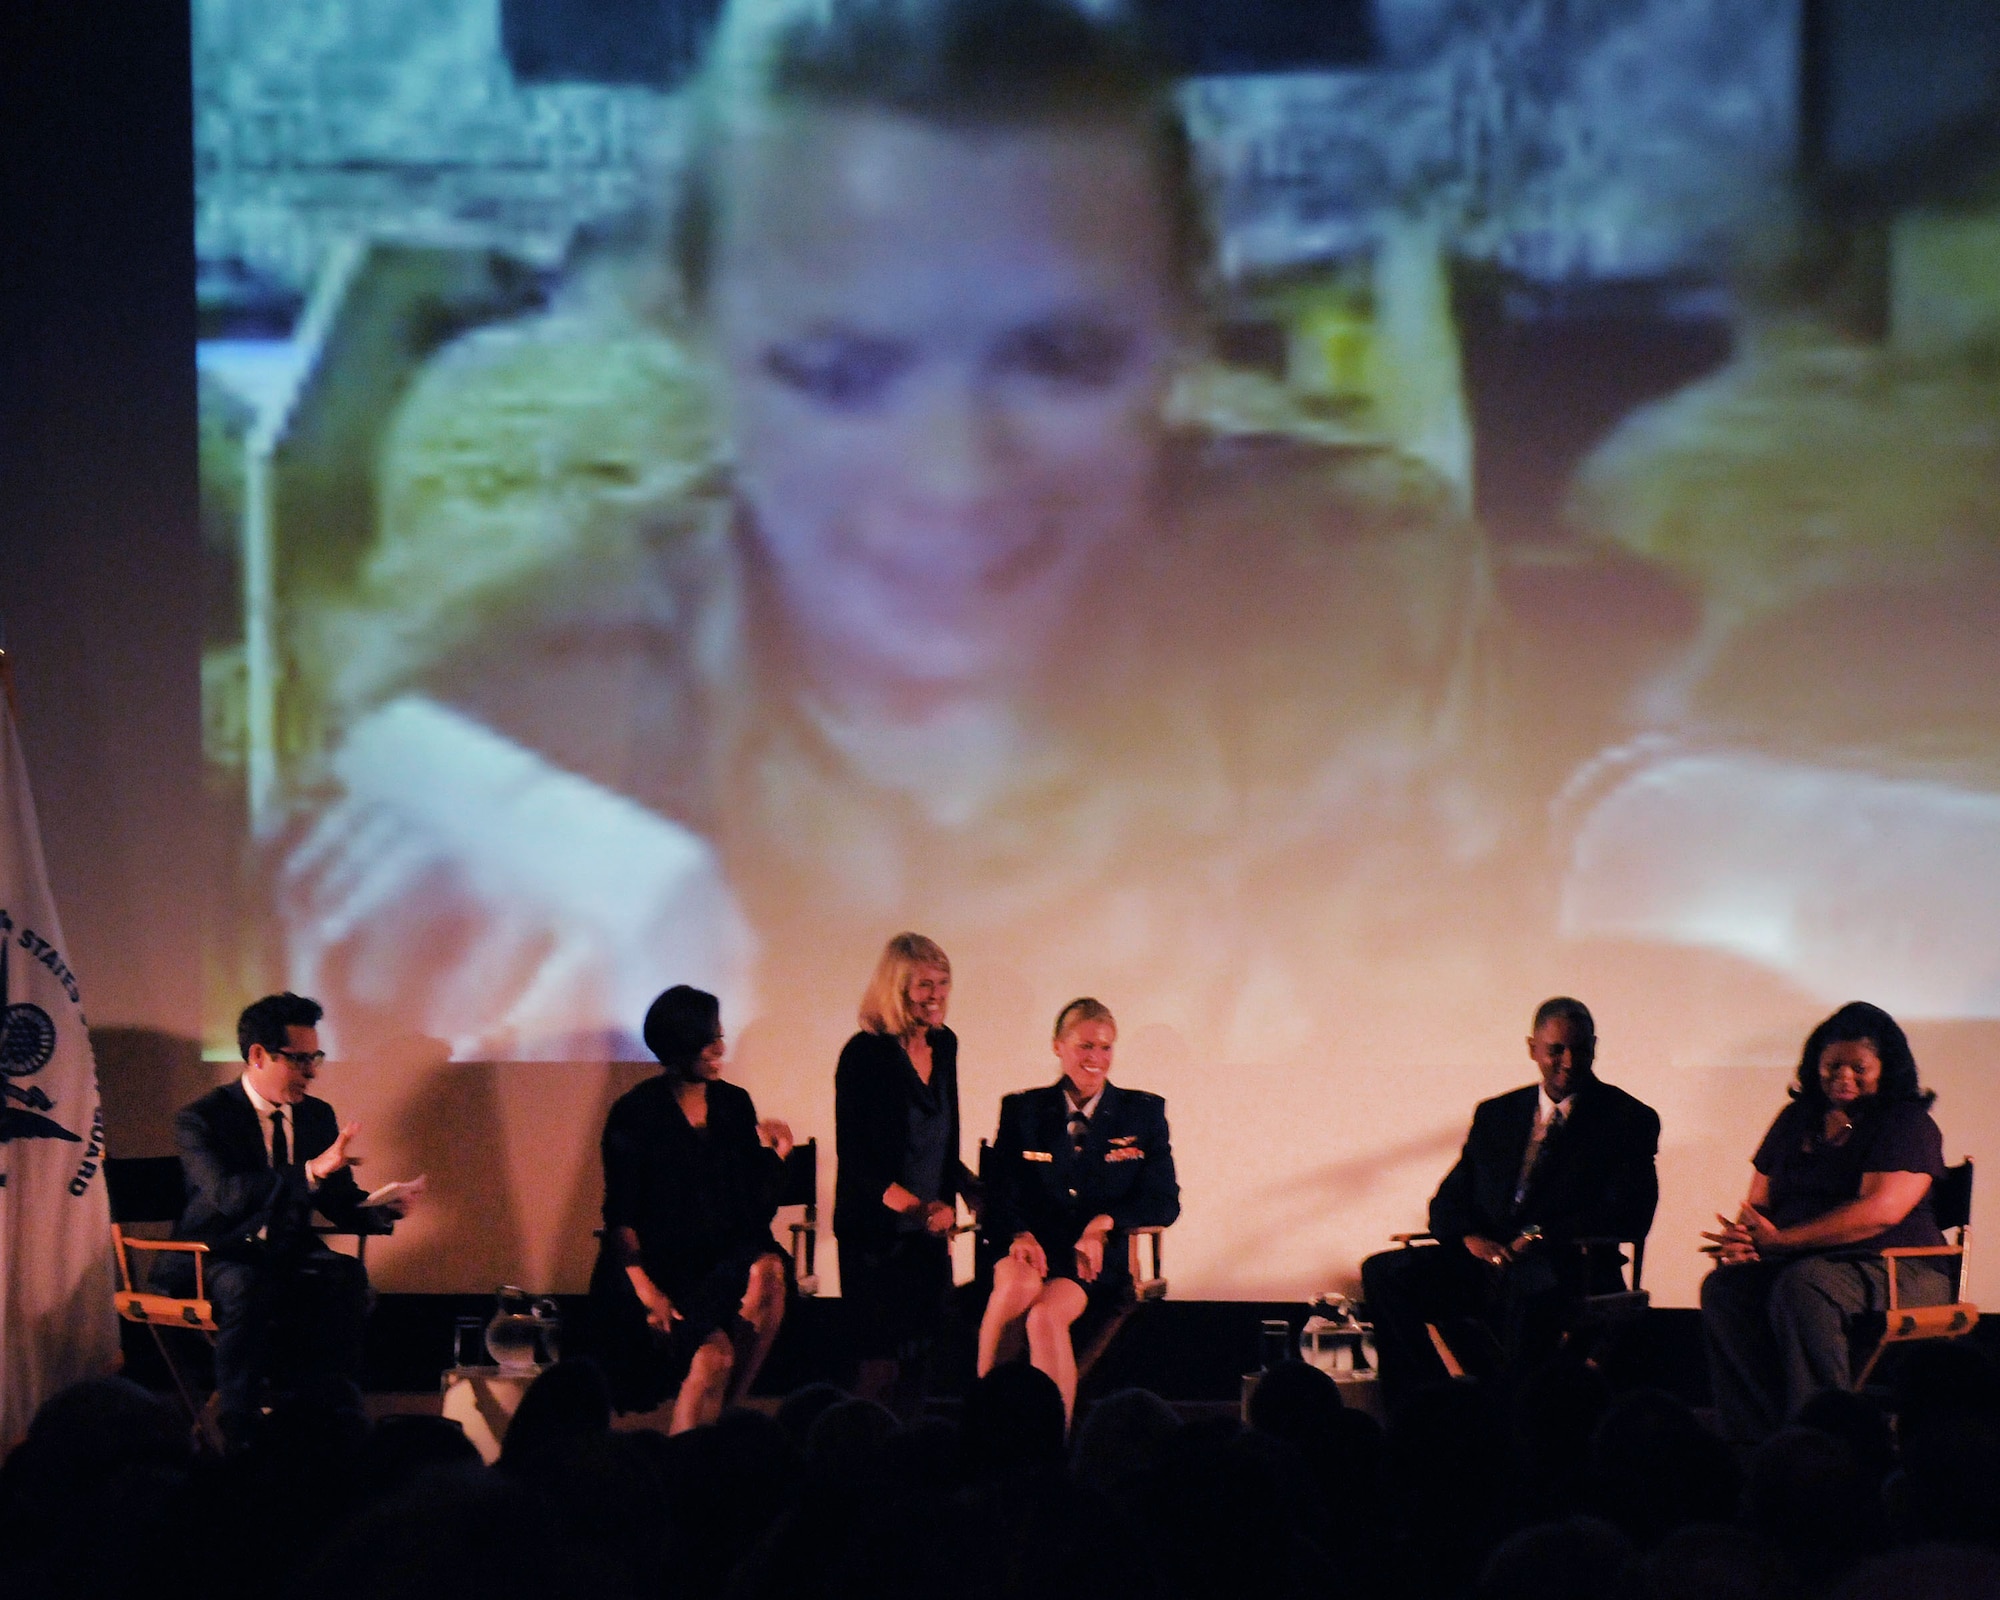 Capt. Kelly Smith, C130 pilot with the 146th Airlift Wing, receives a surprise "skype" visit with her sister next to First Lady Michelle Obama during a panel discussion held June 13, 2011 at the Writers' Guild Theater in Beverly Hills. The First Lady asked writers and producers in the film industry to support the military and their families by sharing their compelling stories and using them in their plotlines. (Photo by Master Sgt. Dave Buttner)